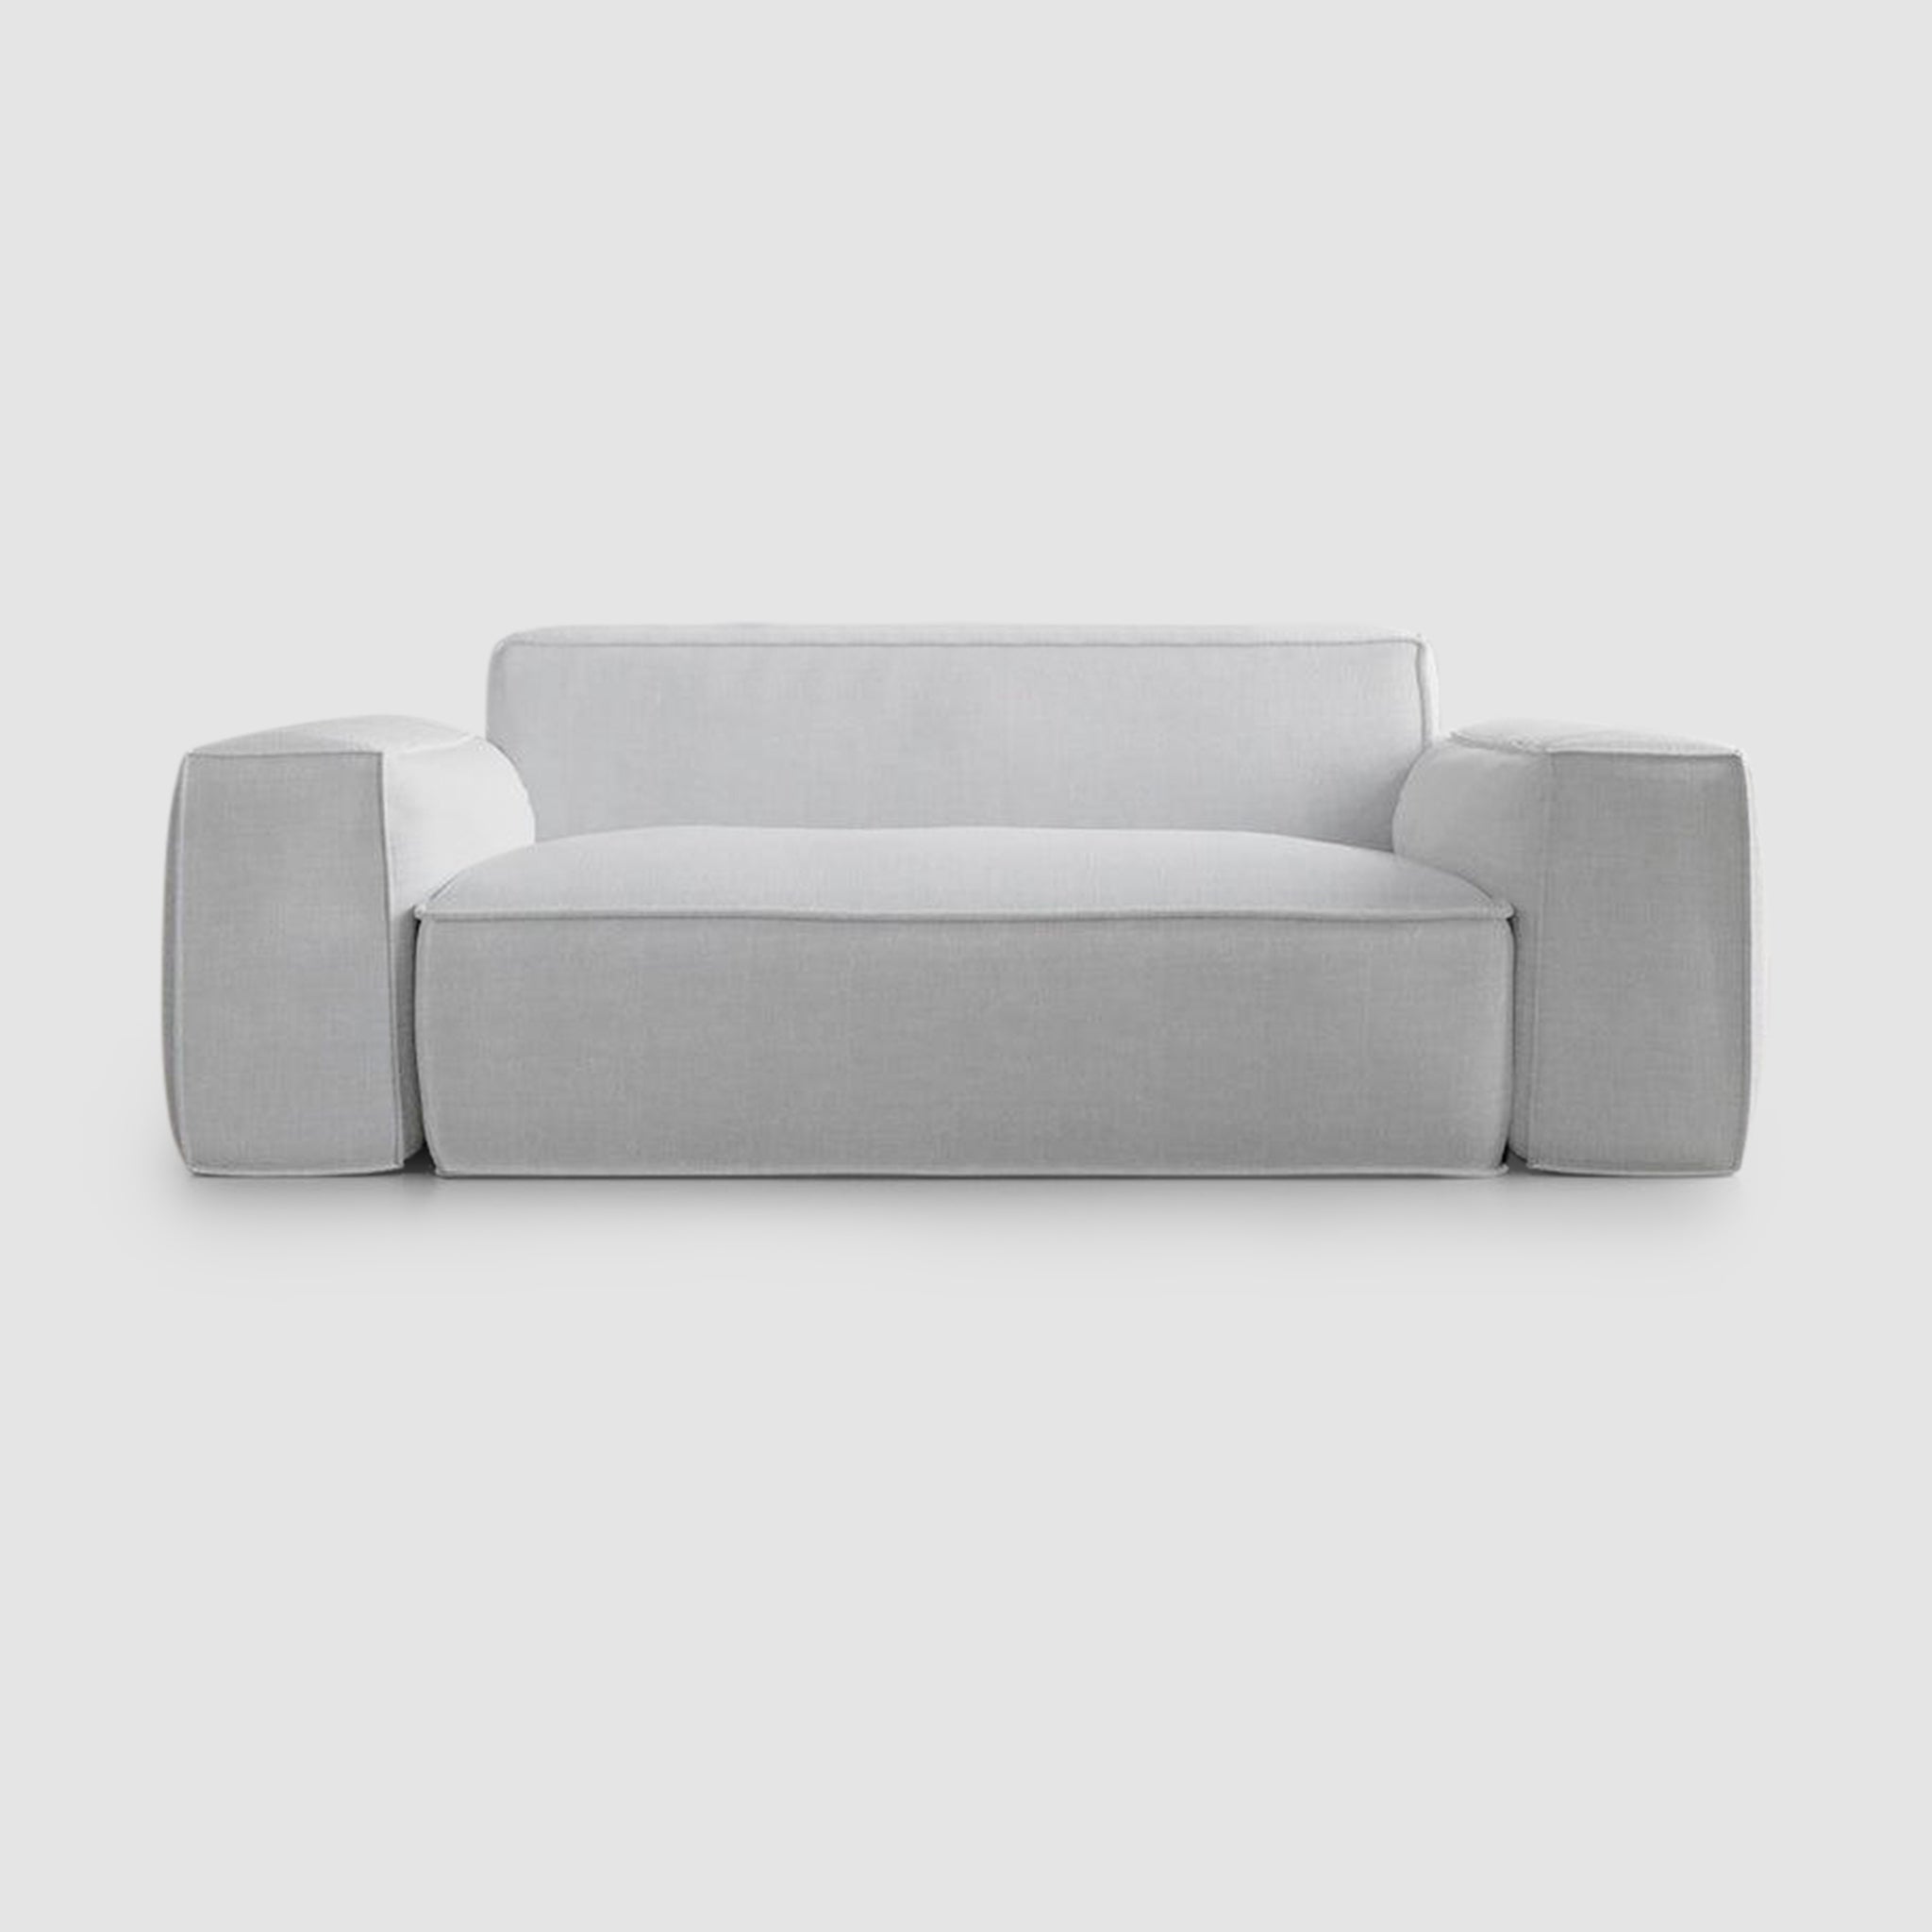 Simple and modern white sofa with inviting plush cushions.